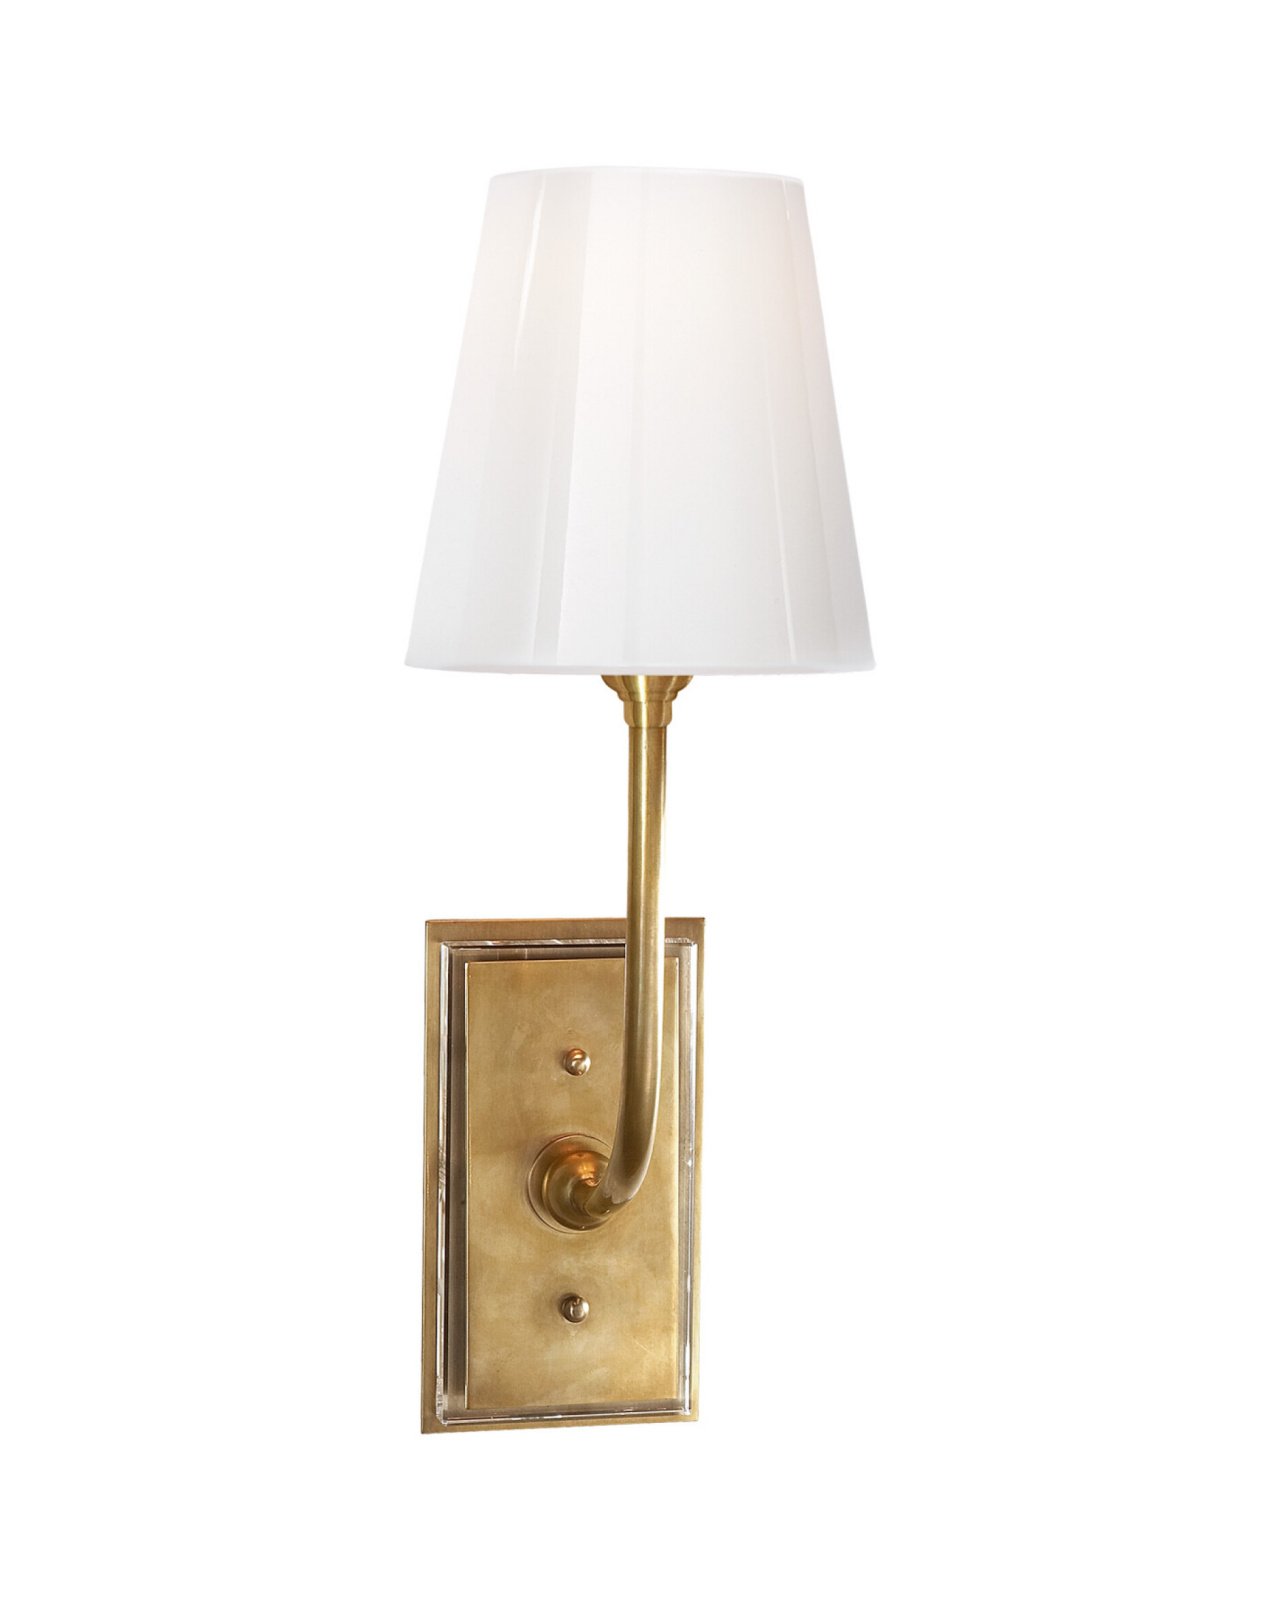 Hulton Sconce Antique Brass with Crystal Backplate and White Glass Shade